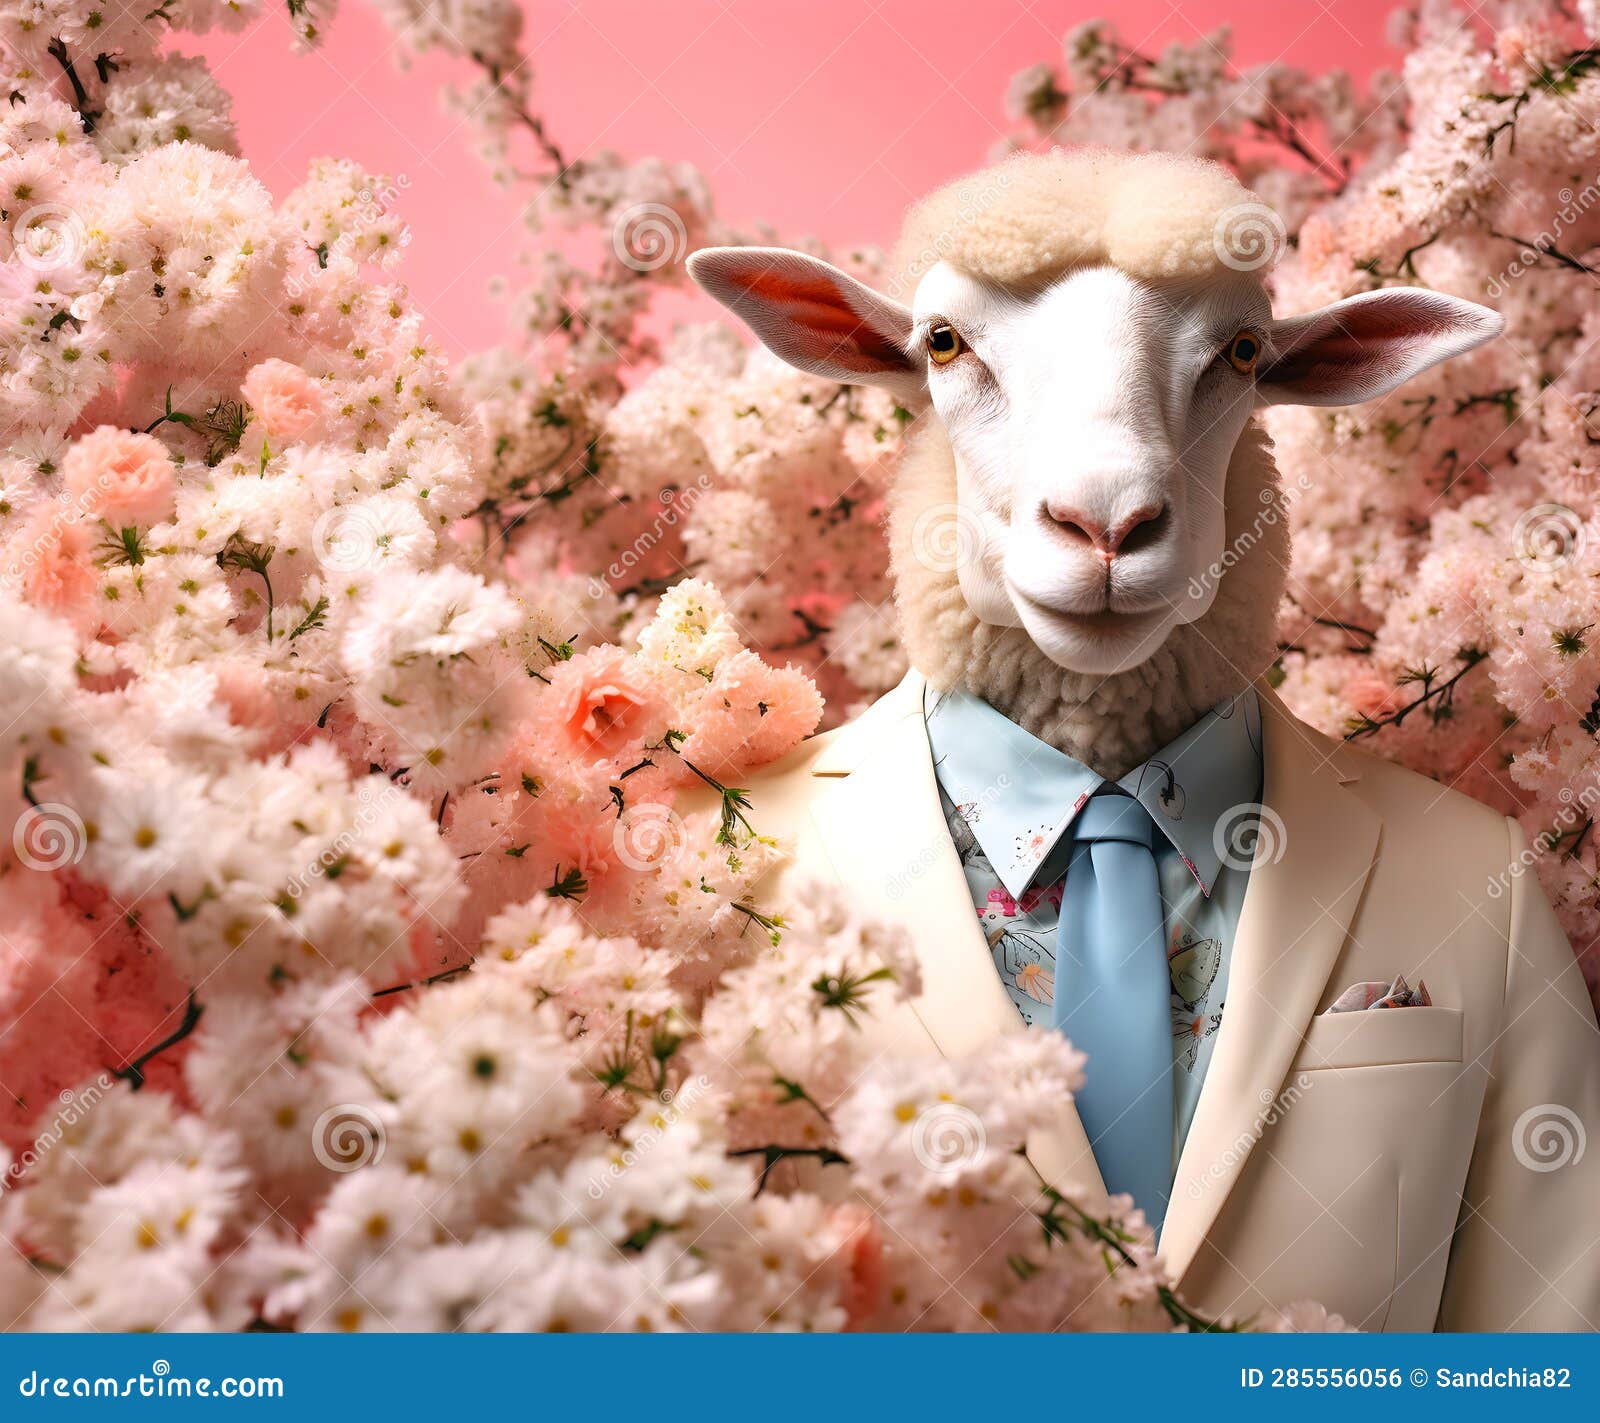 sheep lamb smart suit surrounded surreal garden full blossom flowers floral landscape creative animal concept 285556056